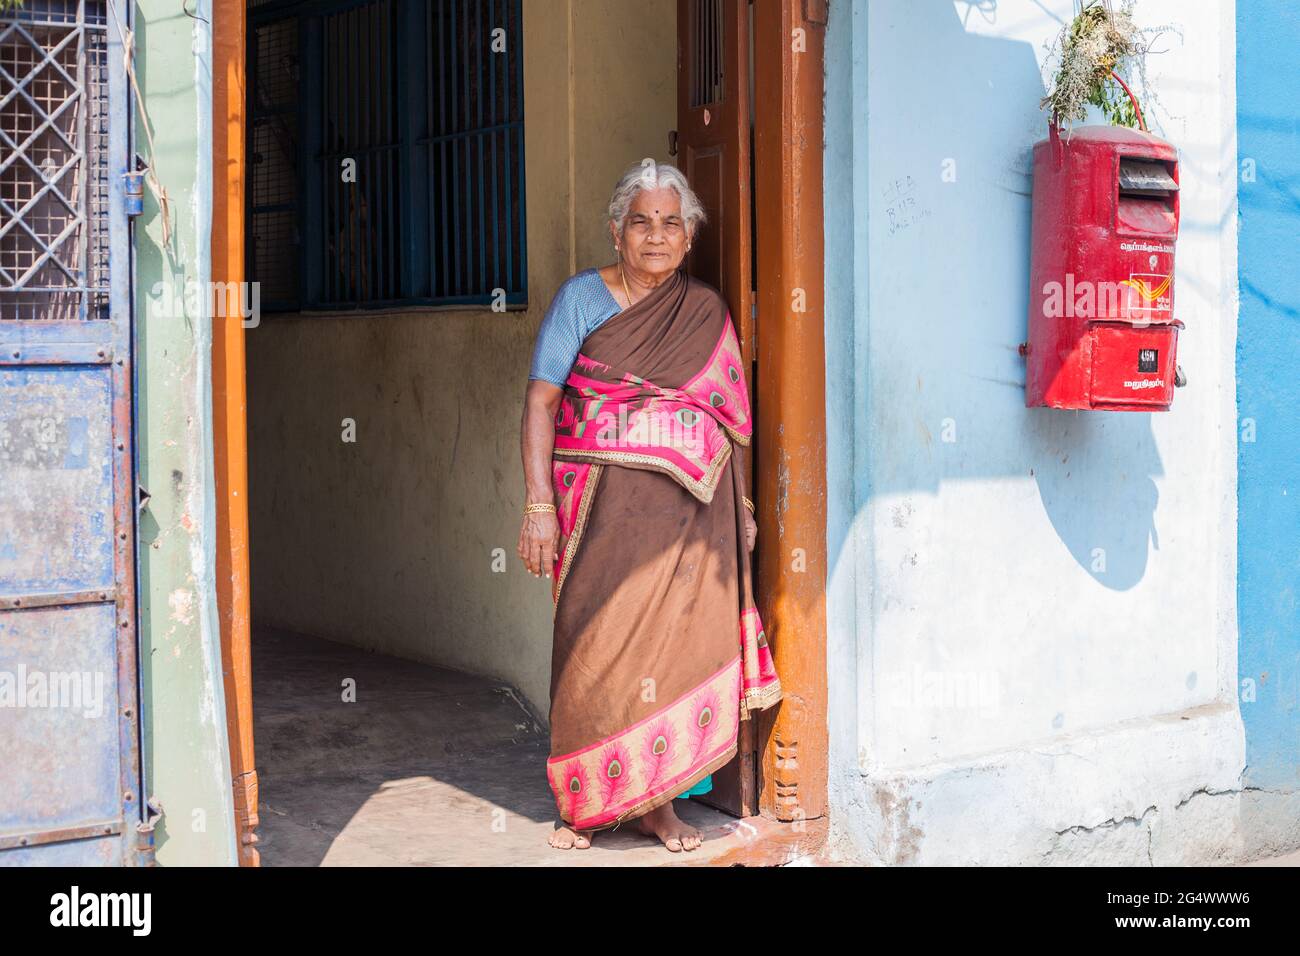 Indian lady poses in doorway beside red India Post letter box, Trichy, Tamil Nadu, India Stock Photo